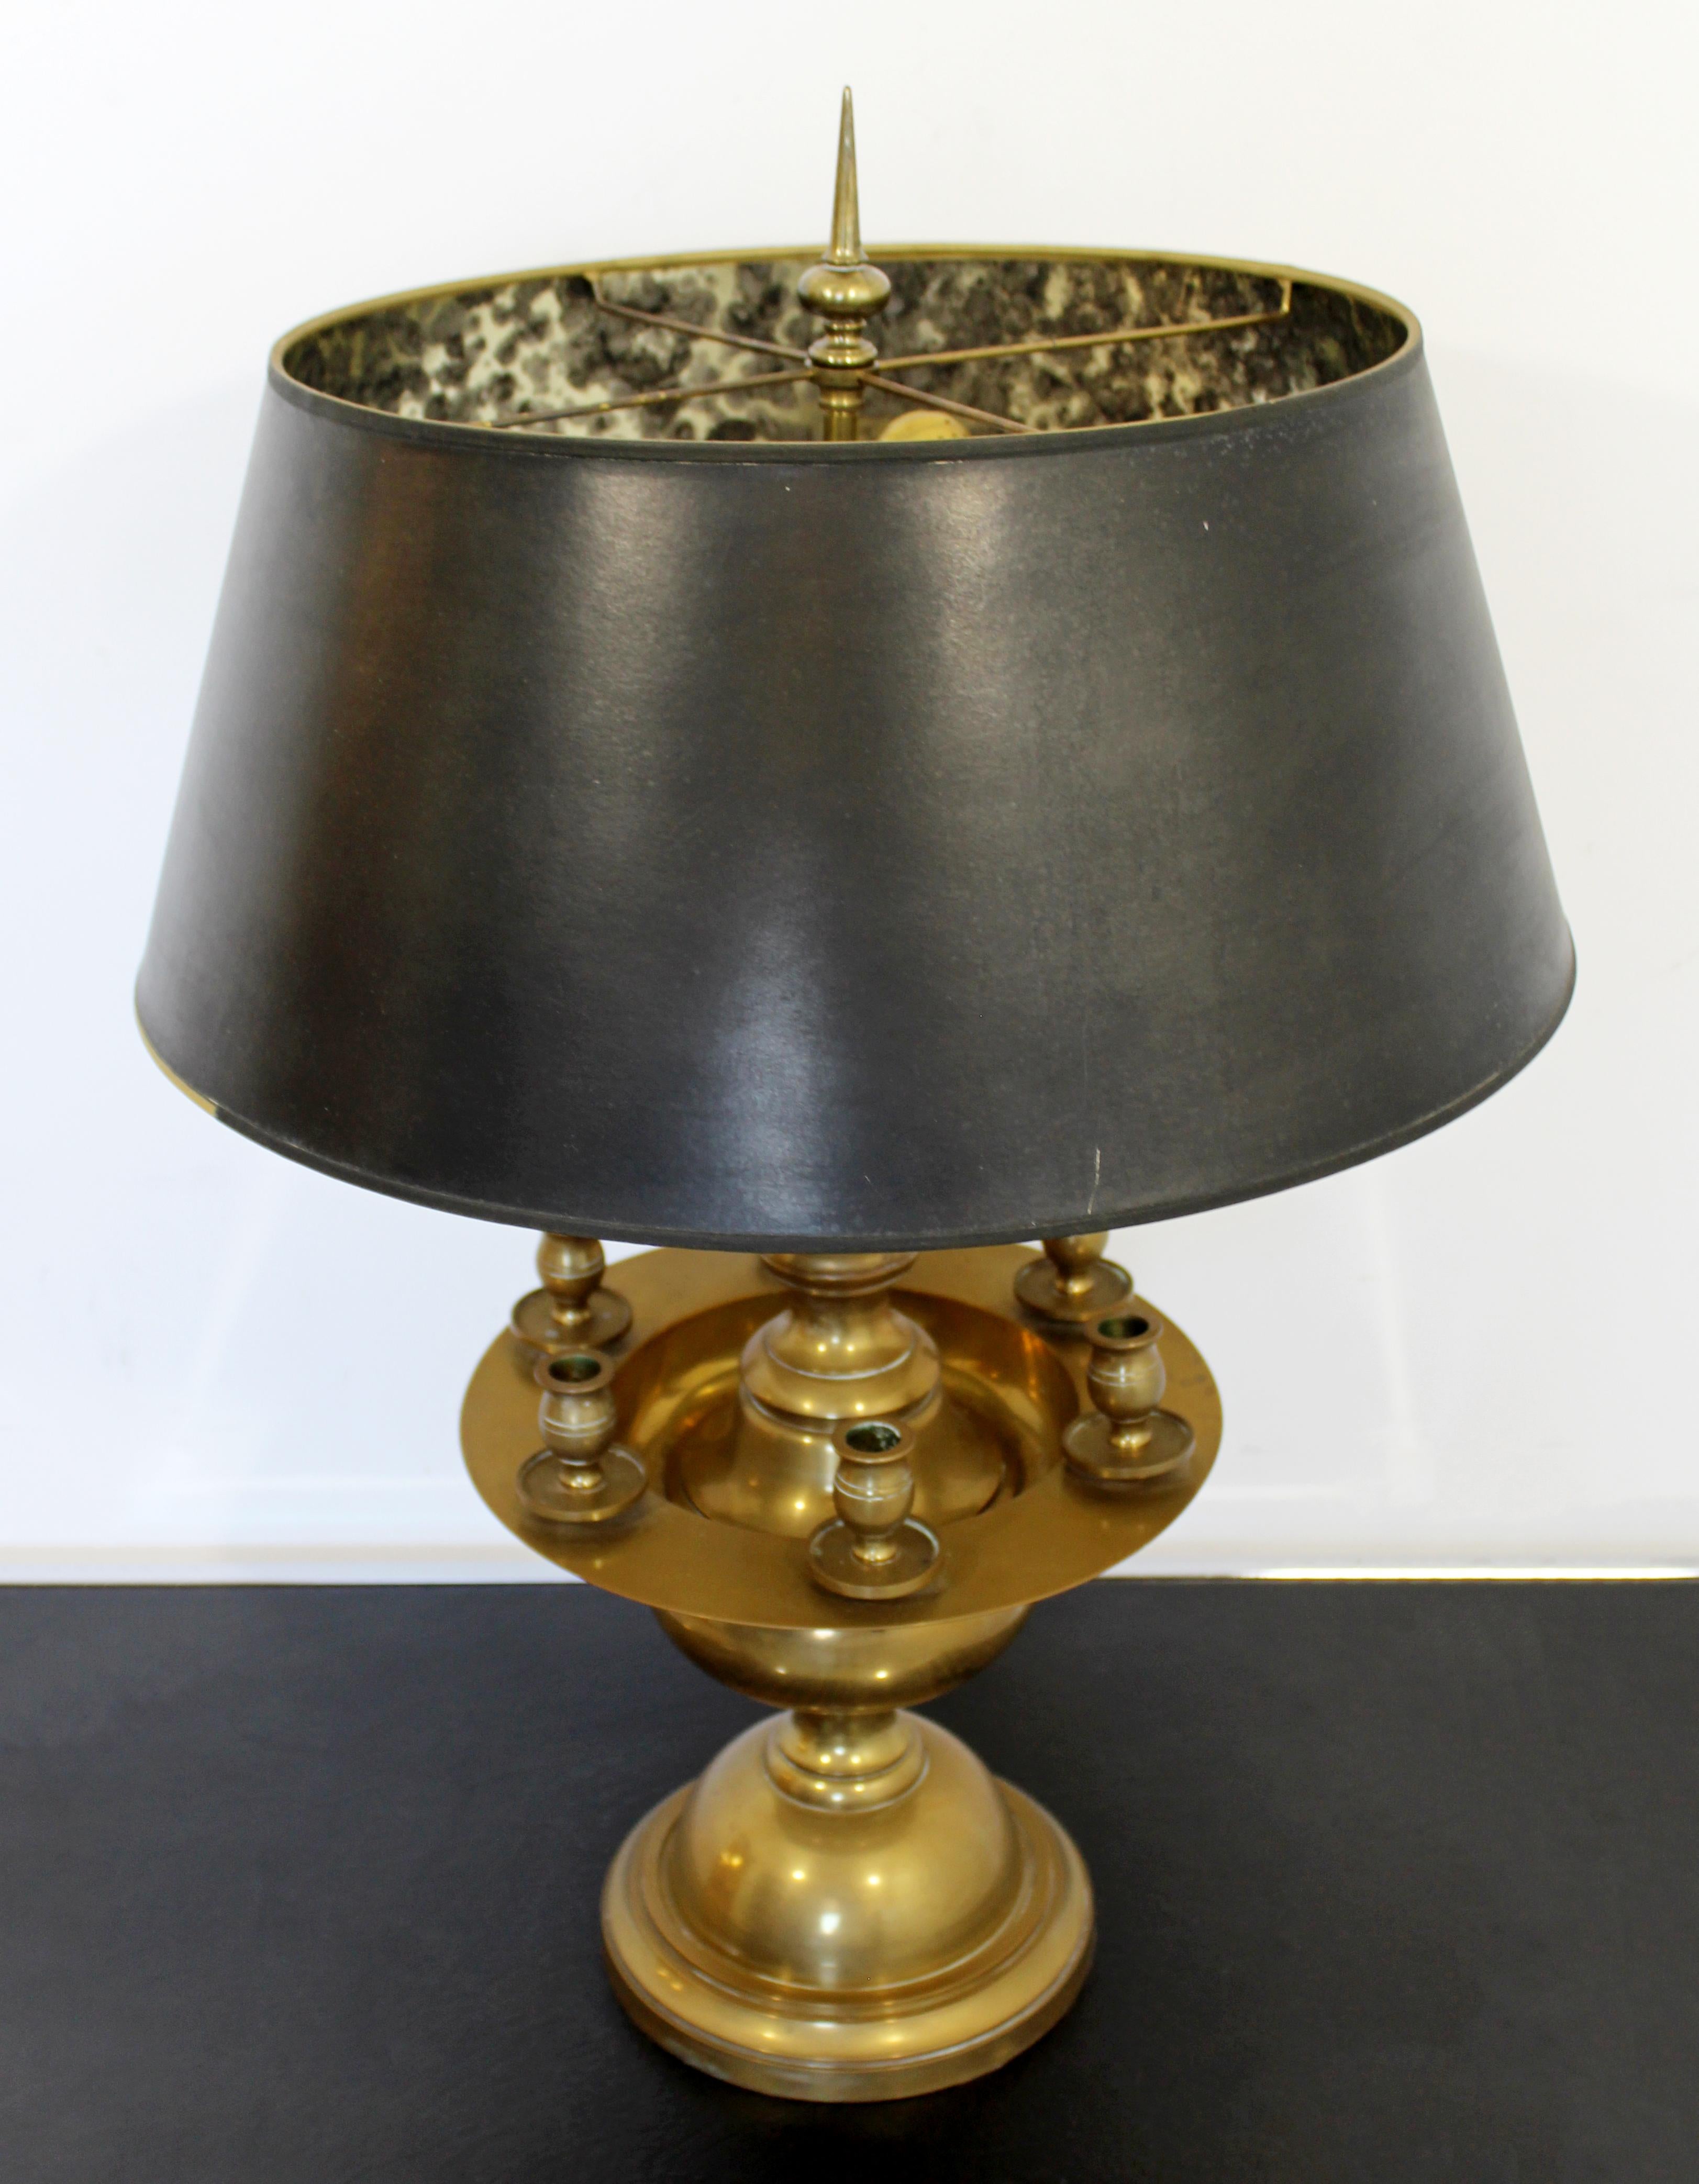 For your consideration is a magnificent, brass candelabra and table lamp, by Chapman, circa the 1970s. In very good vintage condition, with a patina to match its age. The dimensions of the lamp are 12